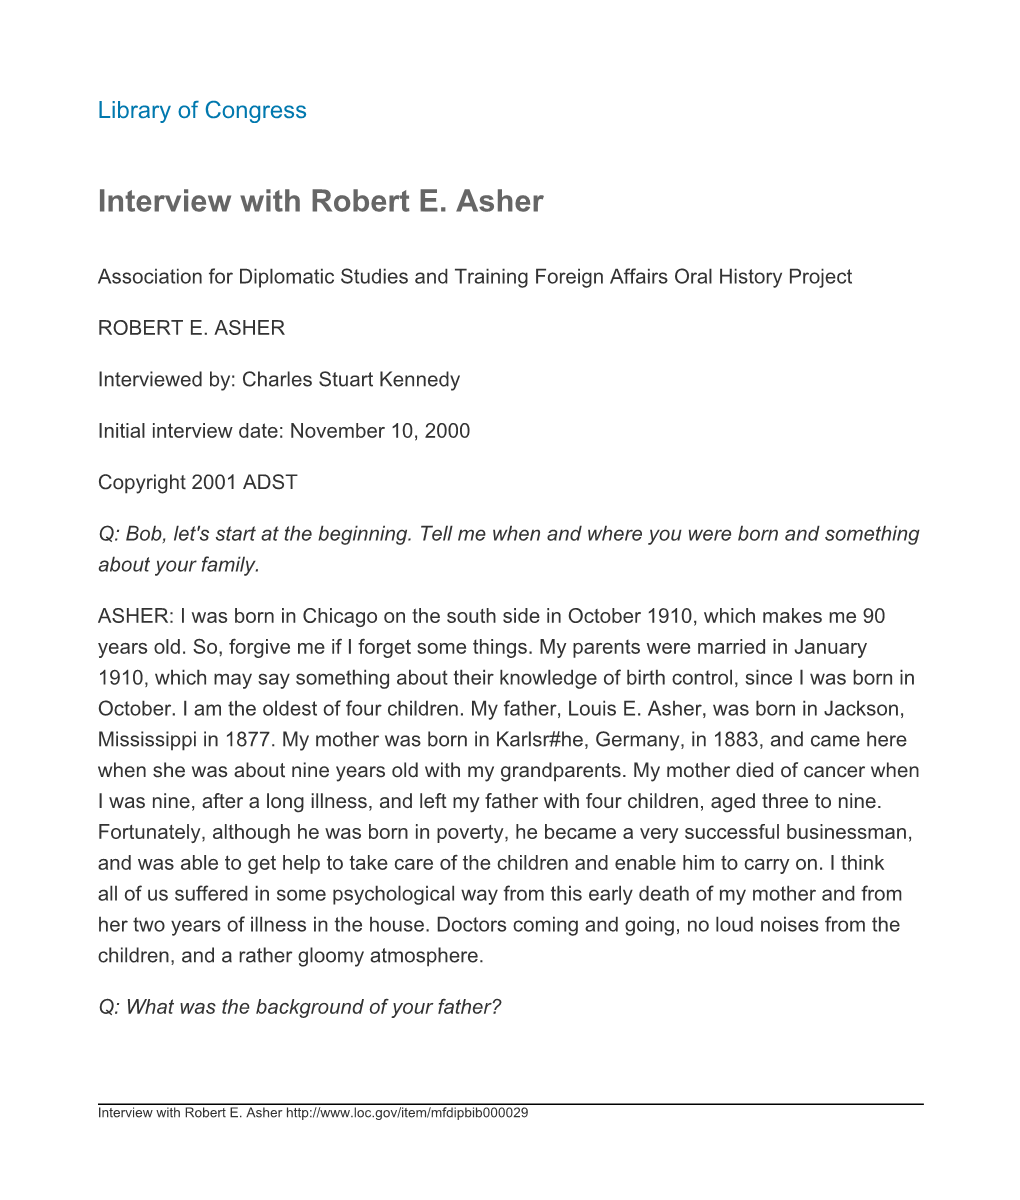 Interview with Robert E. Asher